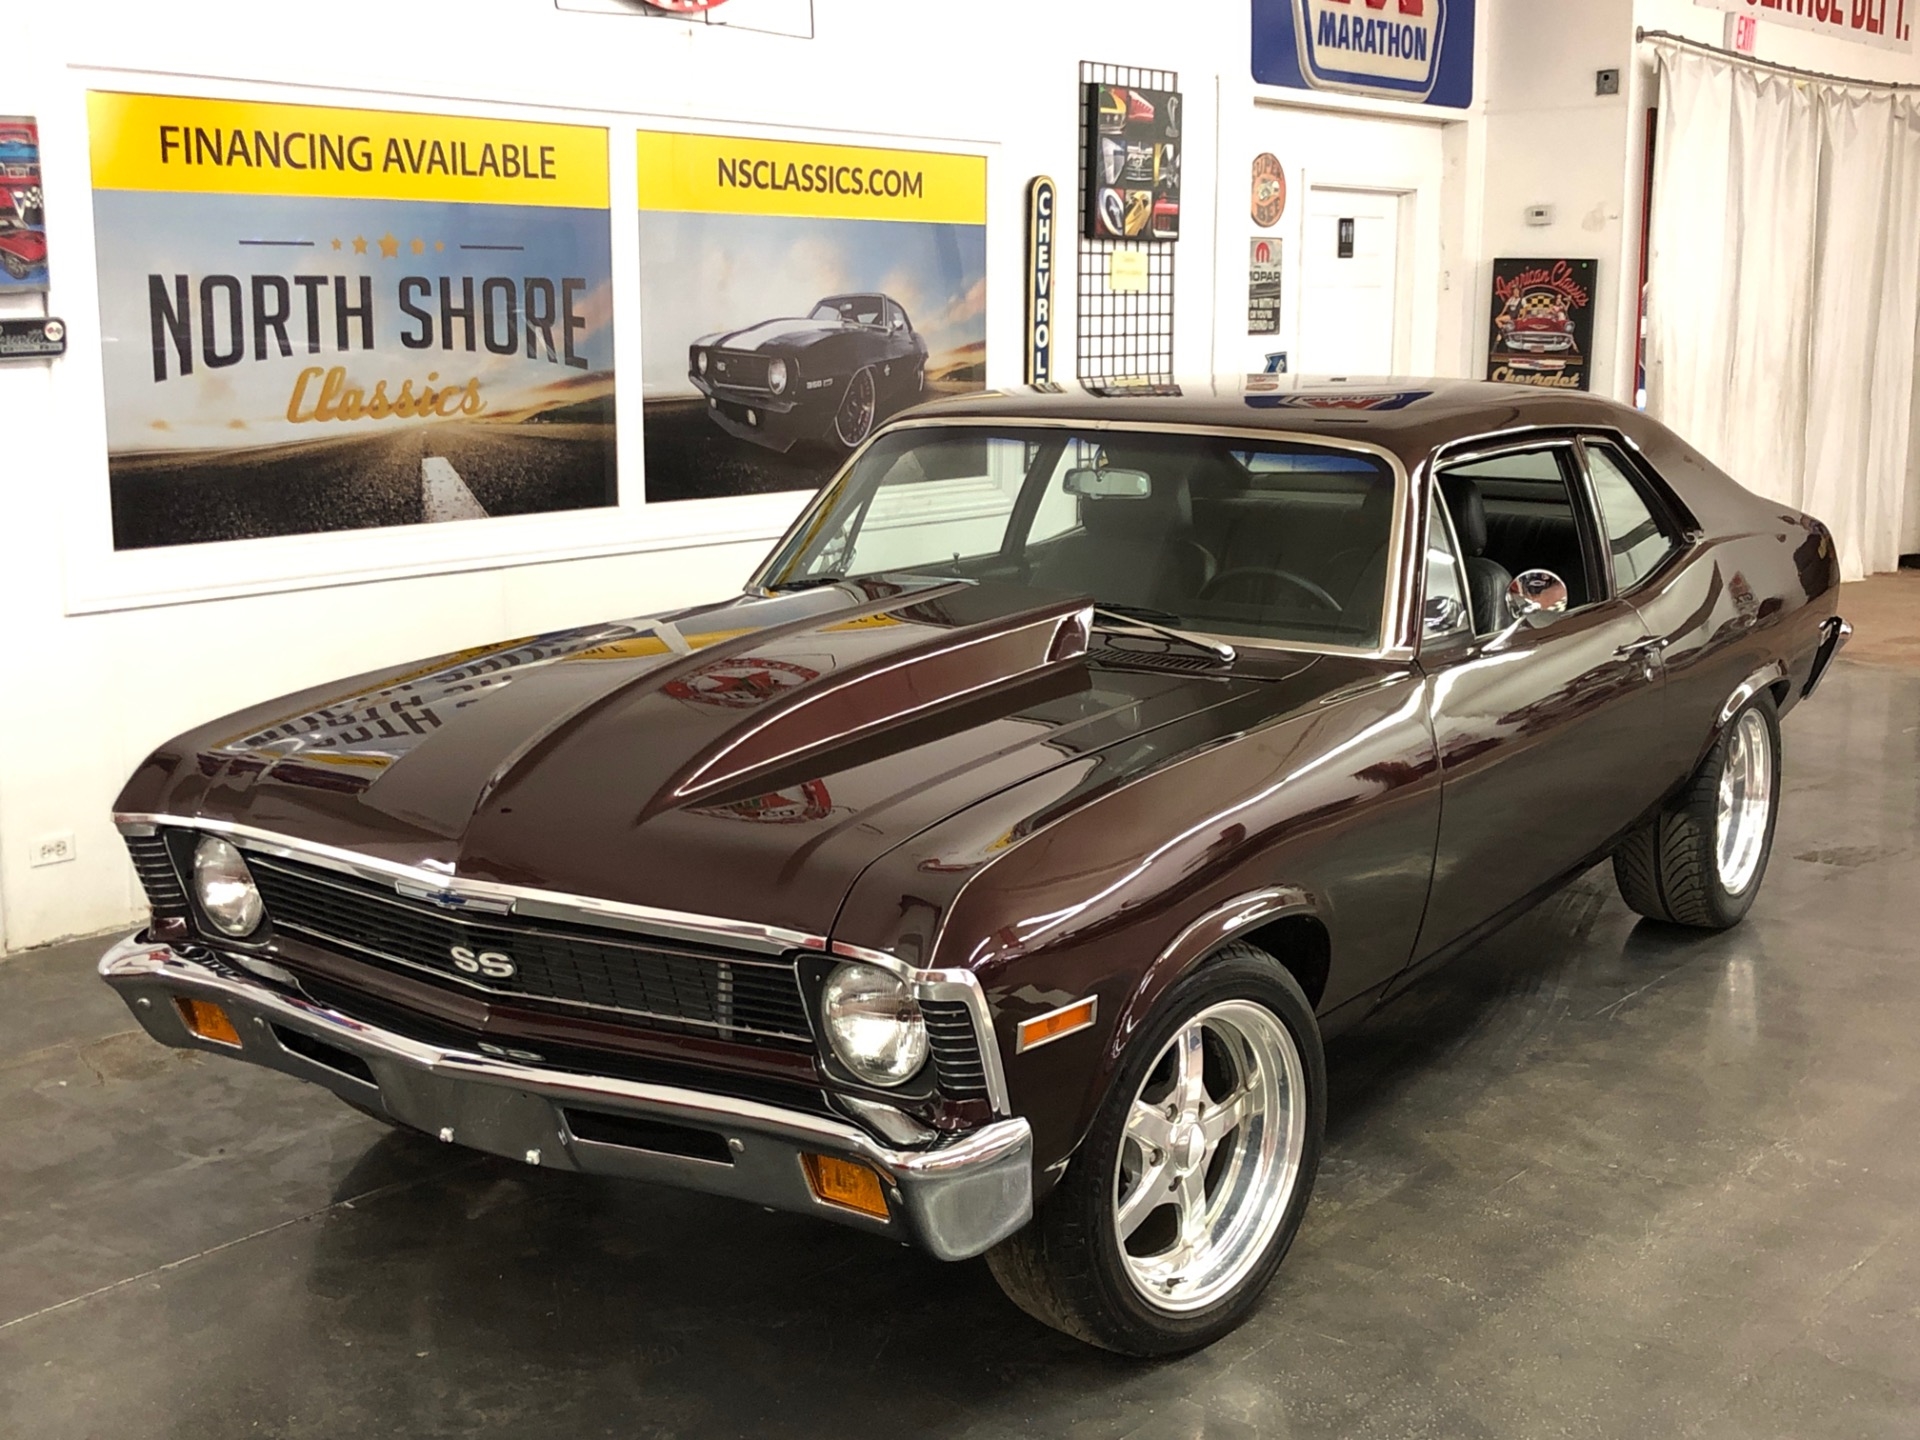 1972 Chevrolet Nova -NEW ARRIVAL-CLEAN AND SOLID CLASSIC-COME TAKE A L